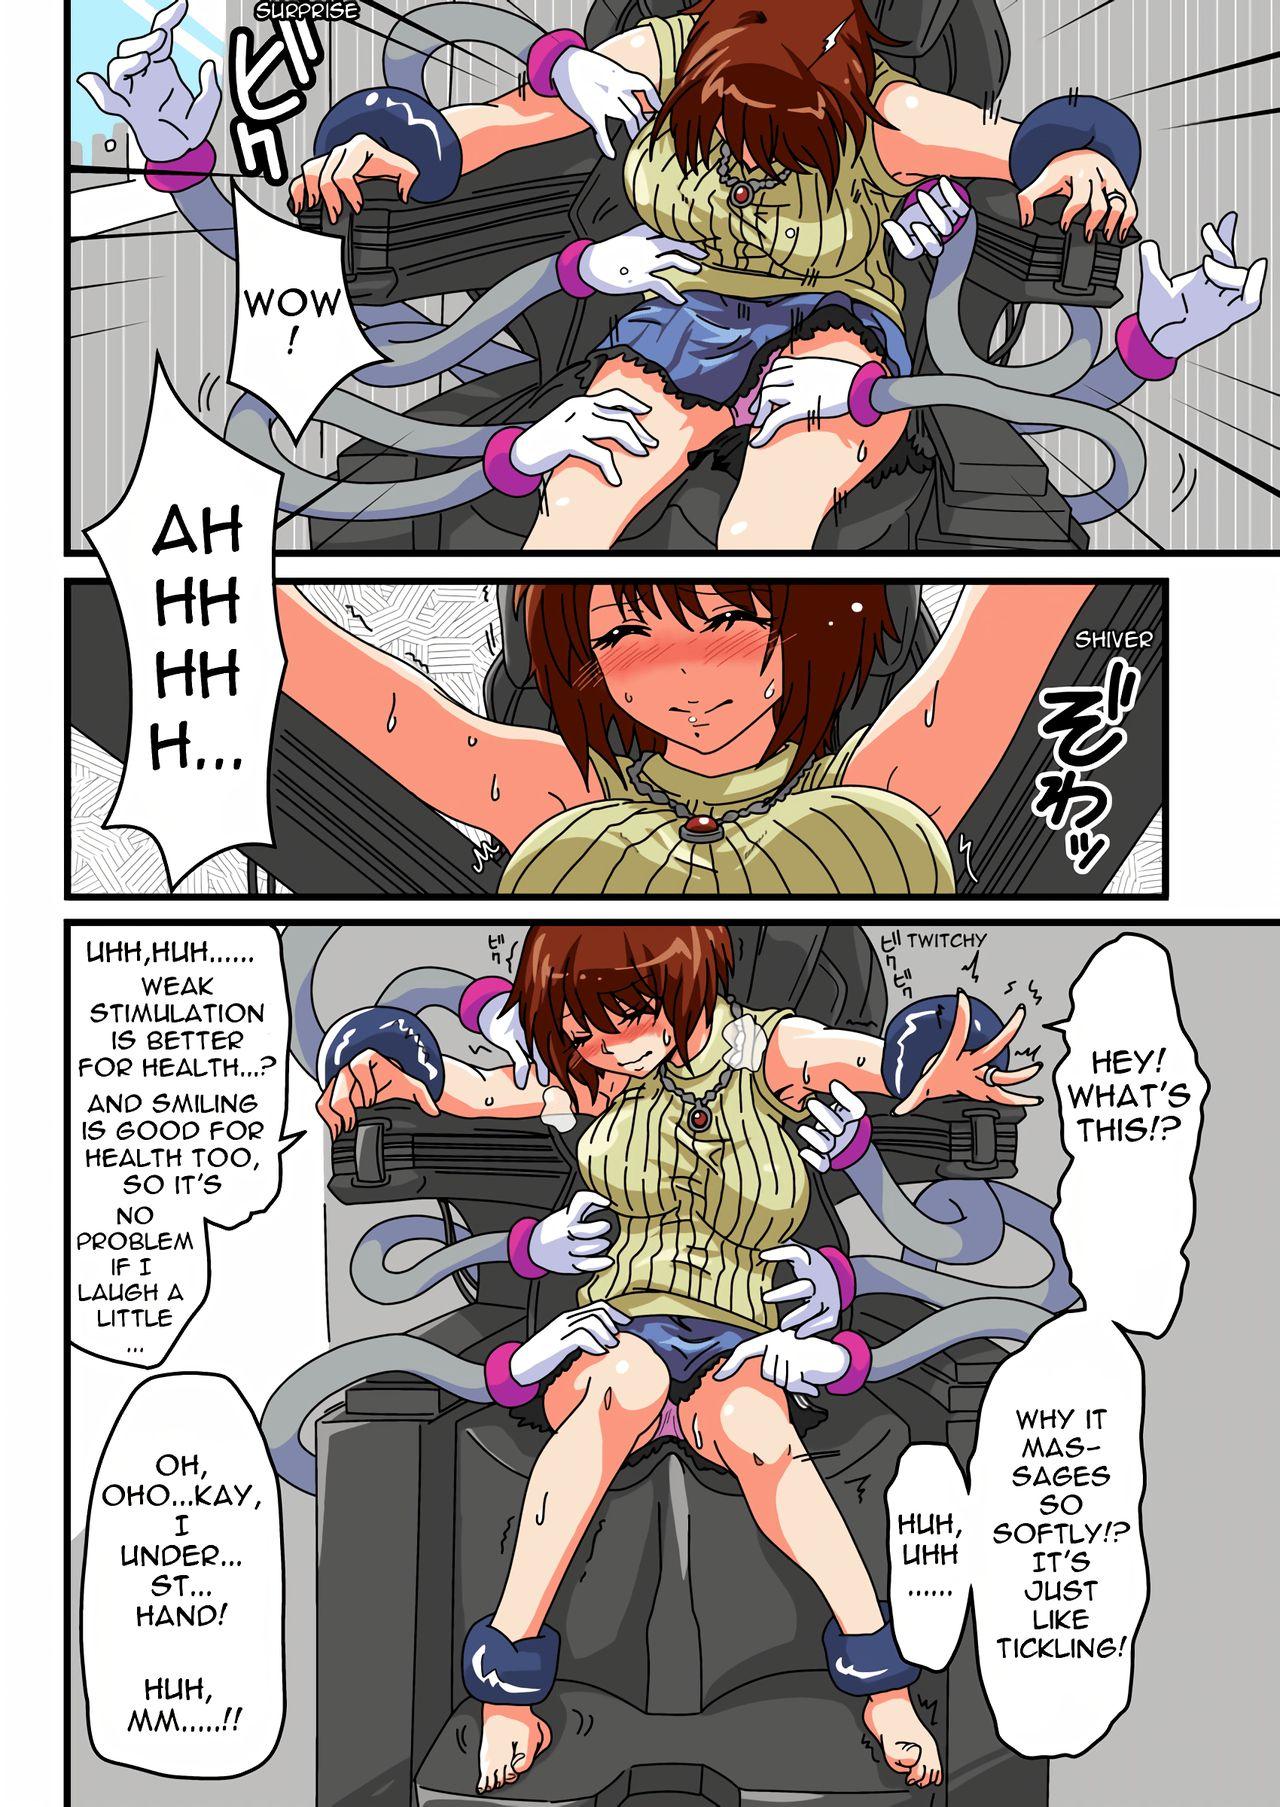 Topless Tickle Massage Chair Animated - Page 6